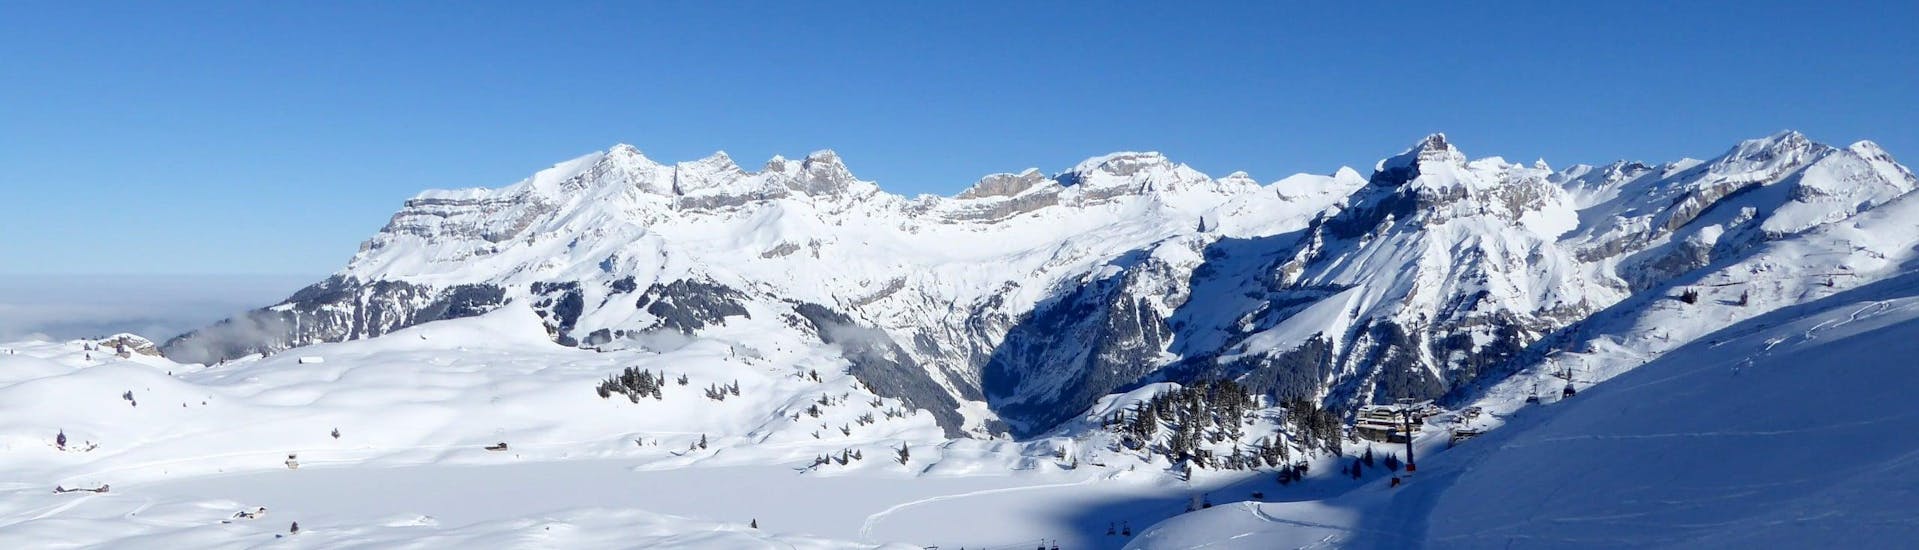 View over the sunny mountain landscape while learning to ski with the ski schools in Engelberg.